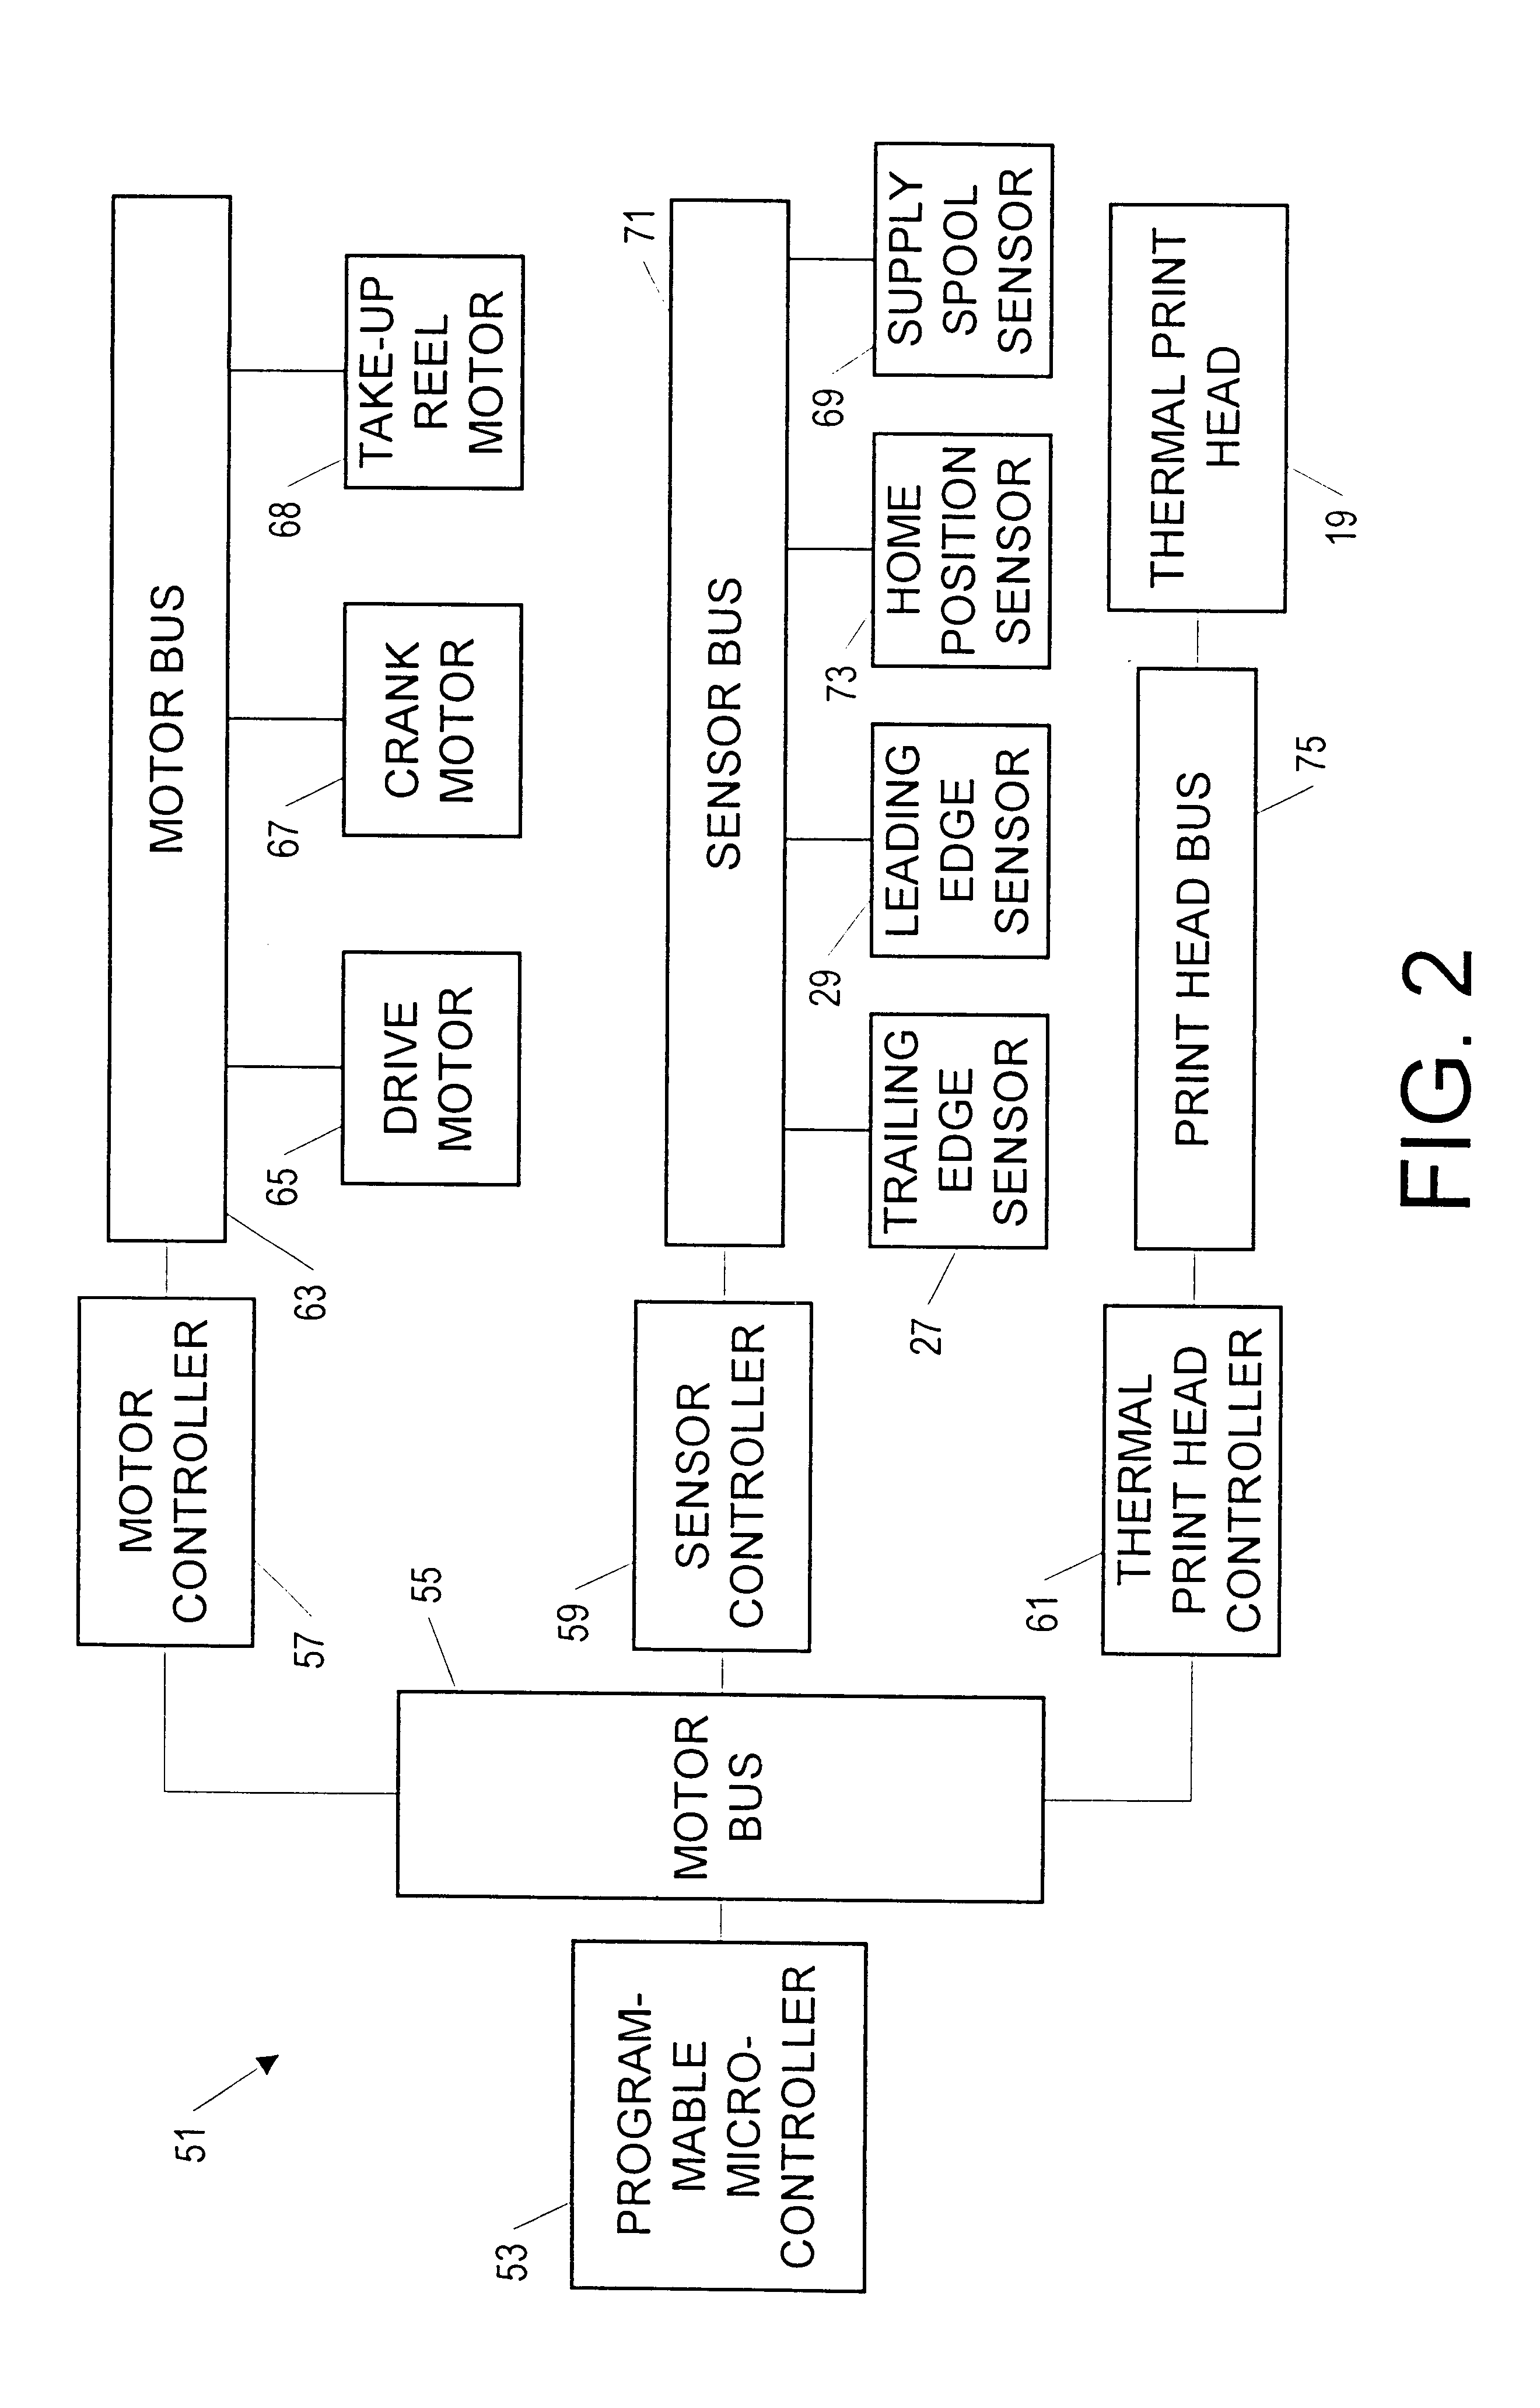 Motion control methodology for a high-speed inserting machine or other mailing apparatus